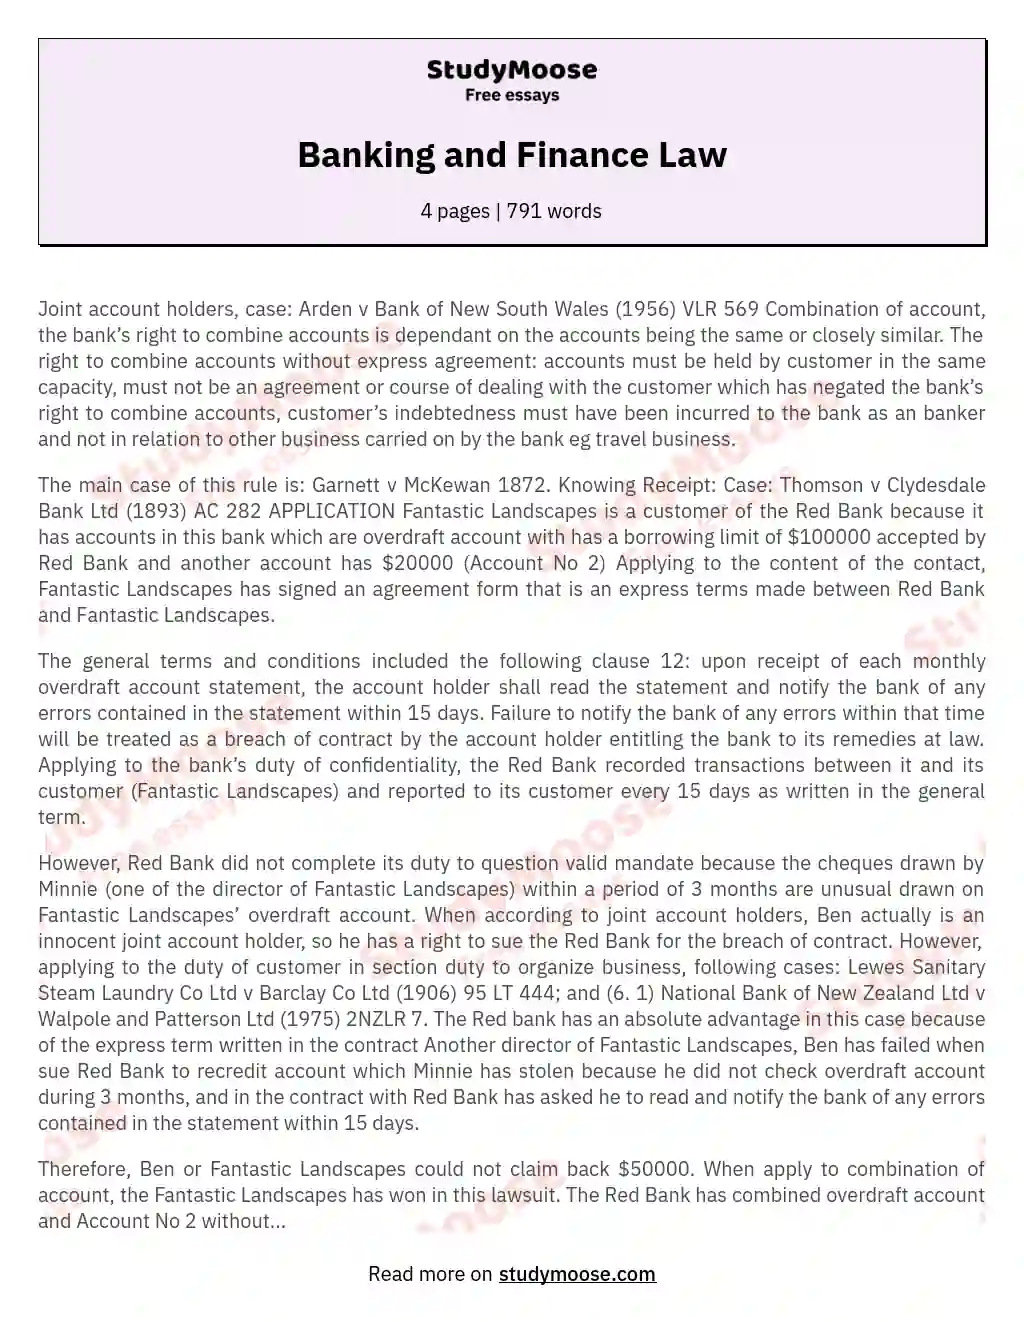 Banking and Finance Law essay